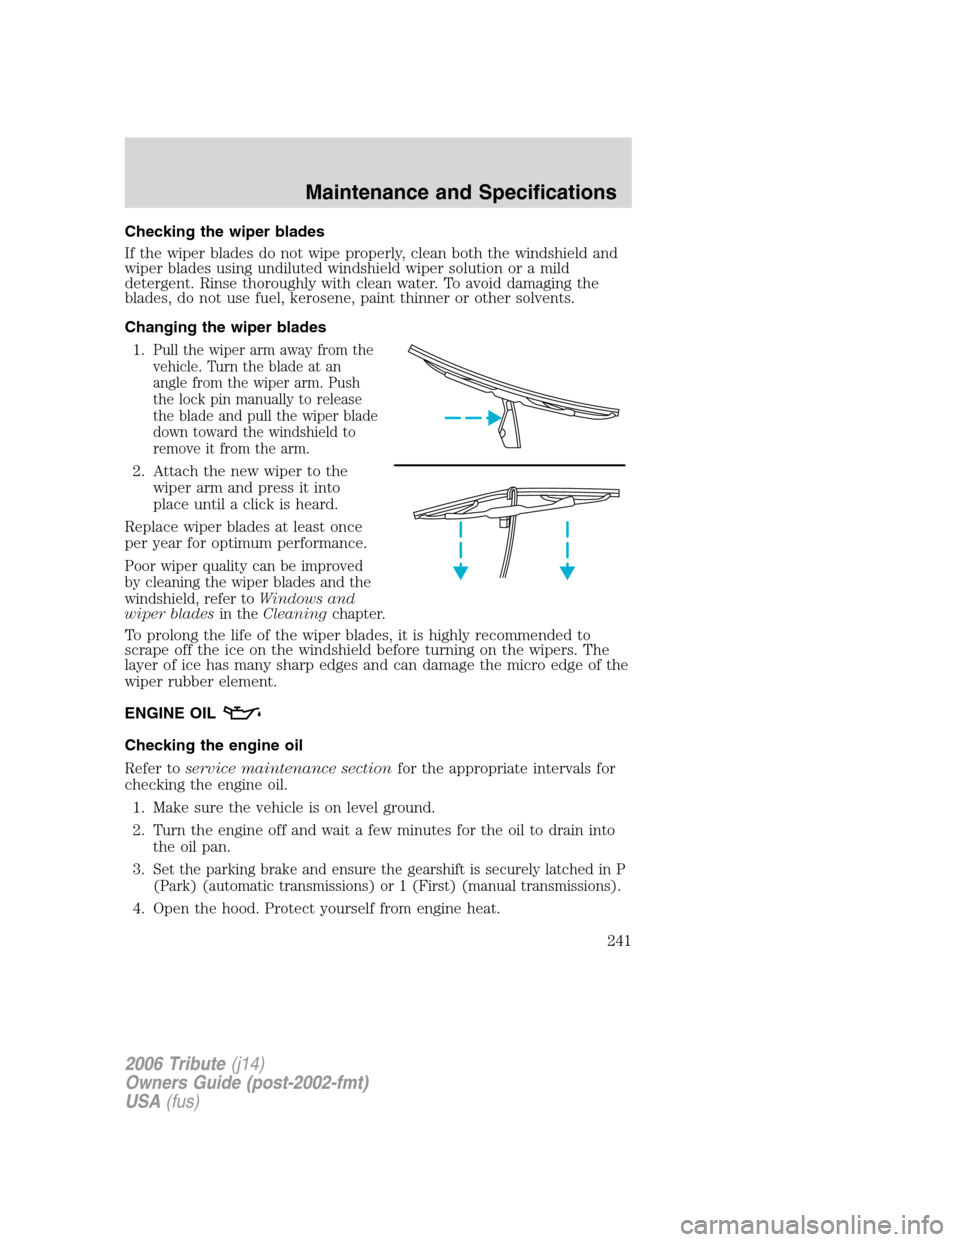 MAZDA MODEL TRIBUTE 2006   (in English) Service Manual Checking the wiper blades
If the wiper blades do not wipe properly, clean both the windshield and
wiper blades using undiluted windshield wiper solution or a mild
detergent. Rinse thoroughly with clea